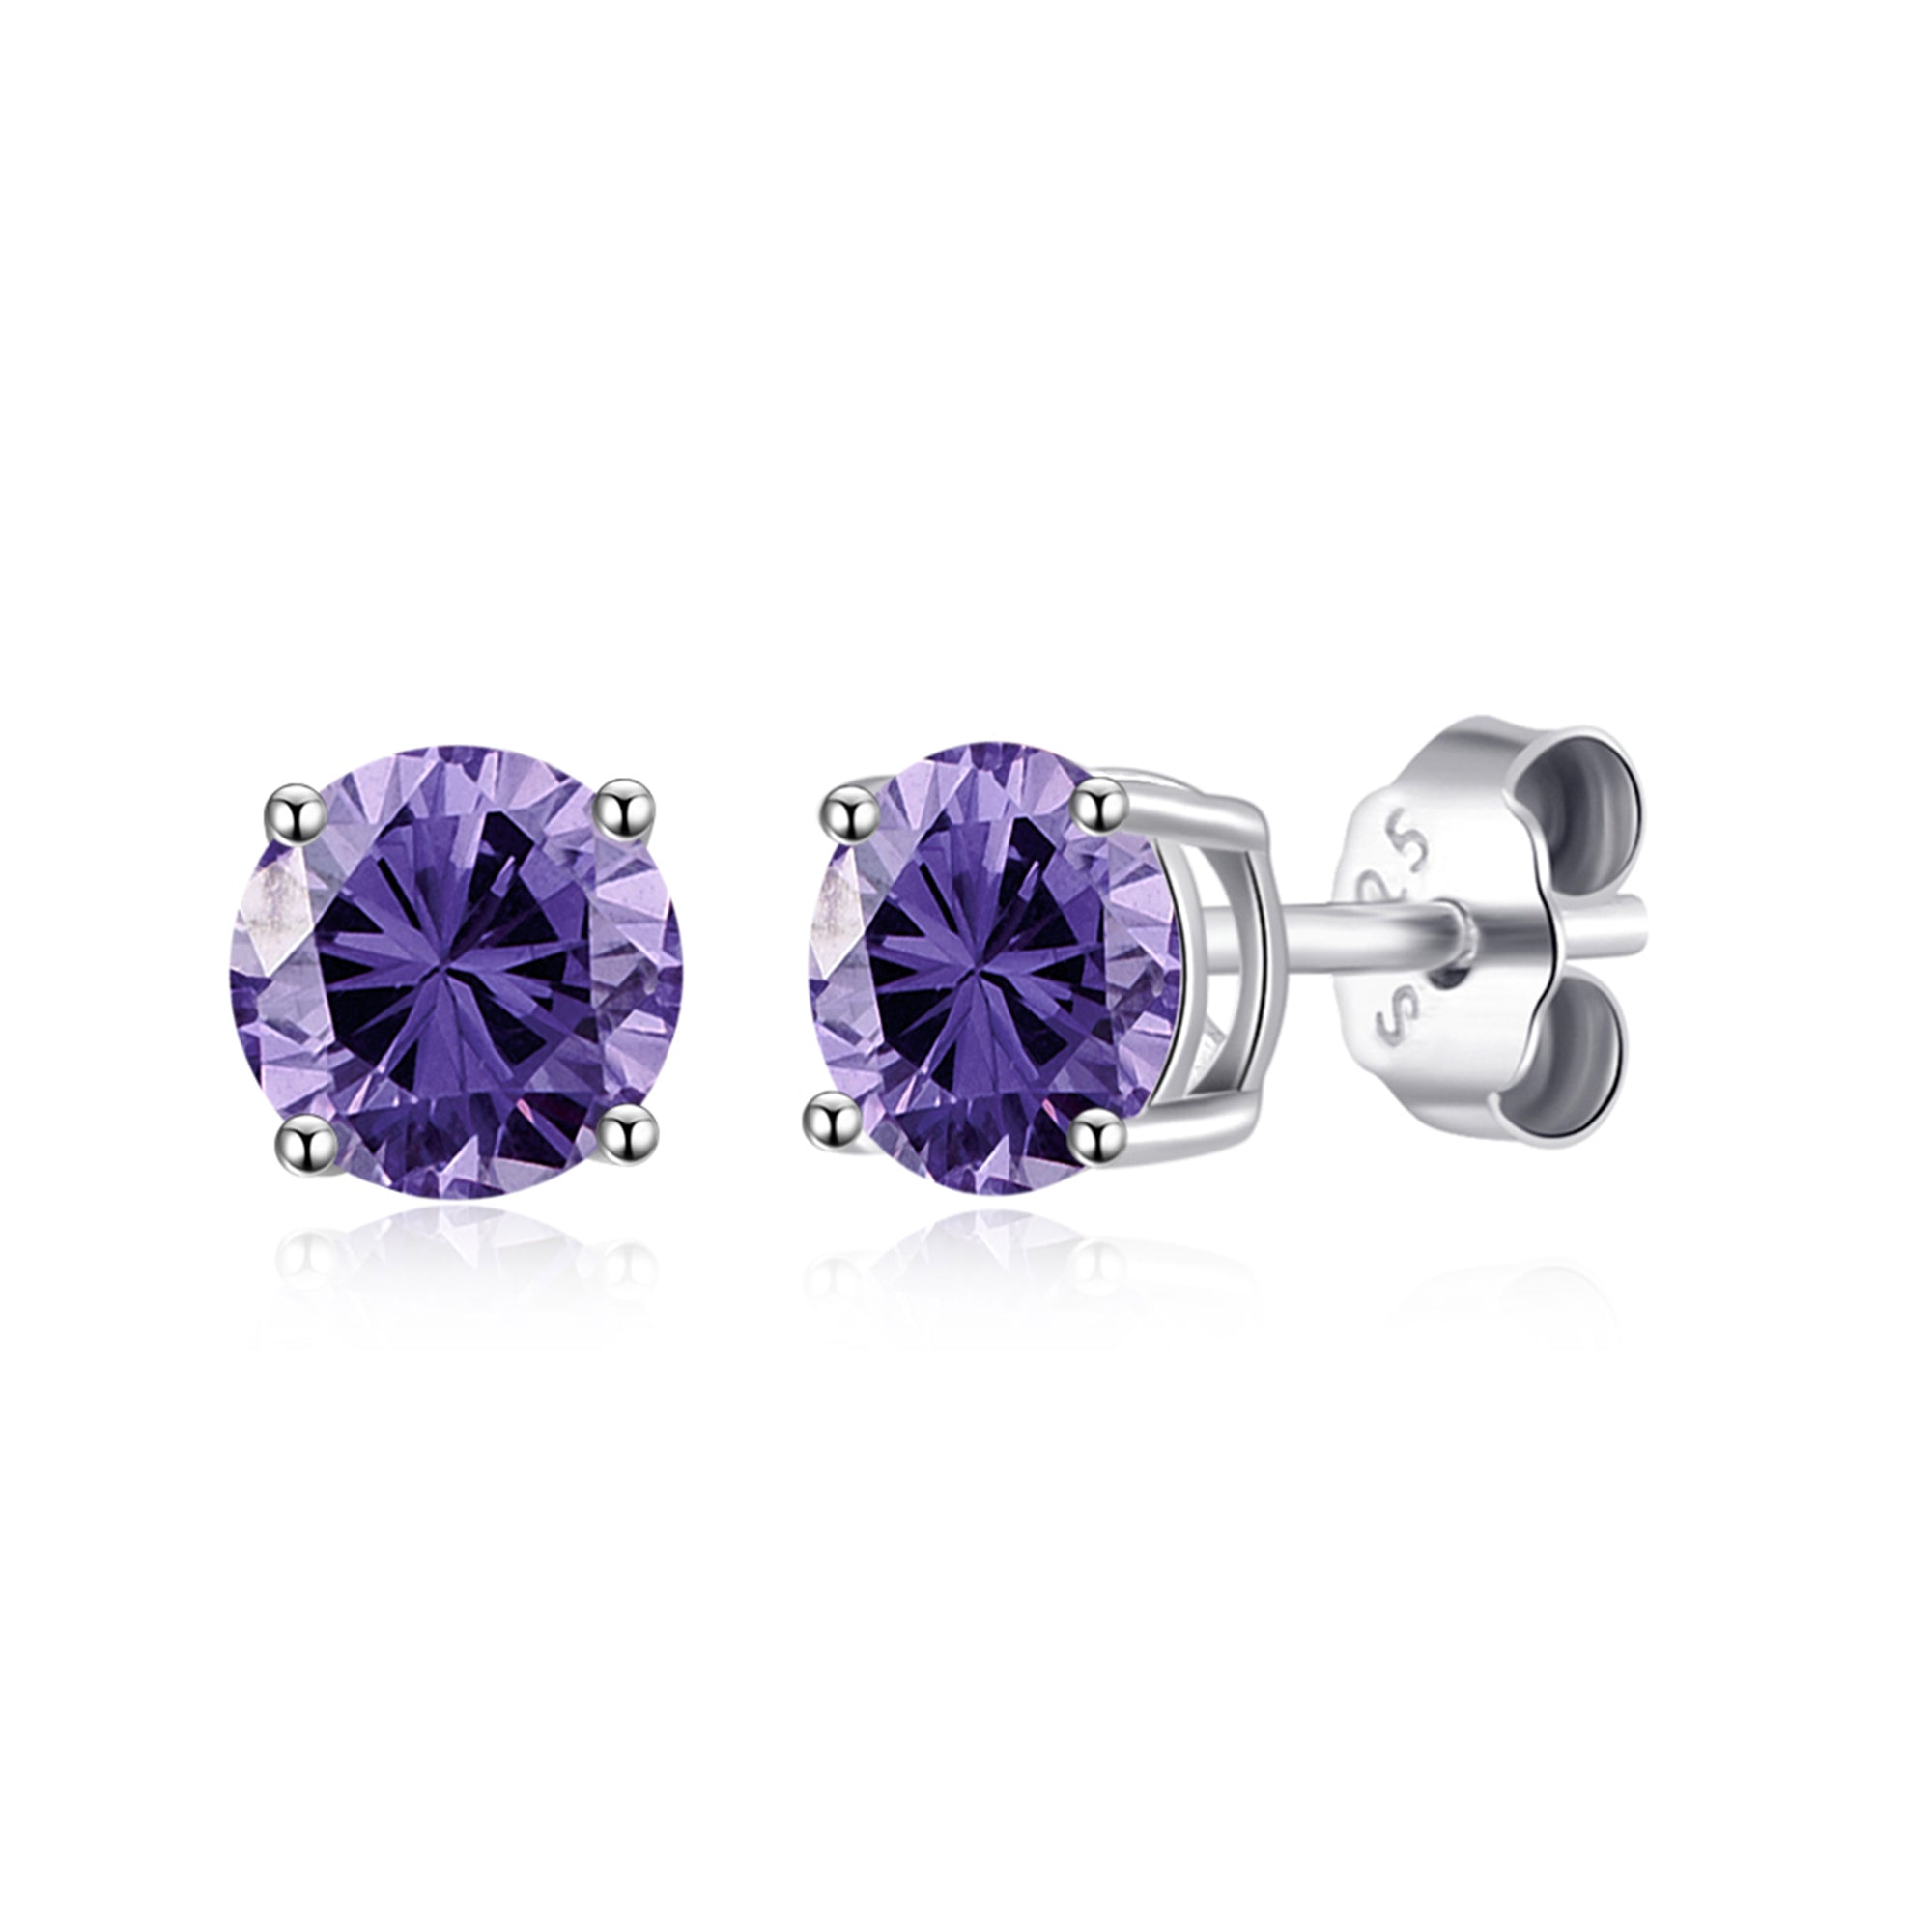 Sterling Silver February (Amethyst) Birthstone Earrings Created with Zircondia® Crystals by Philip Jones Jewellery